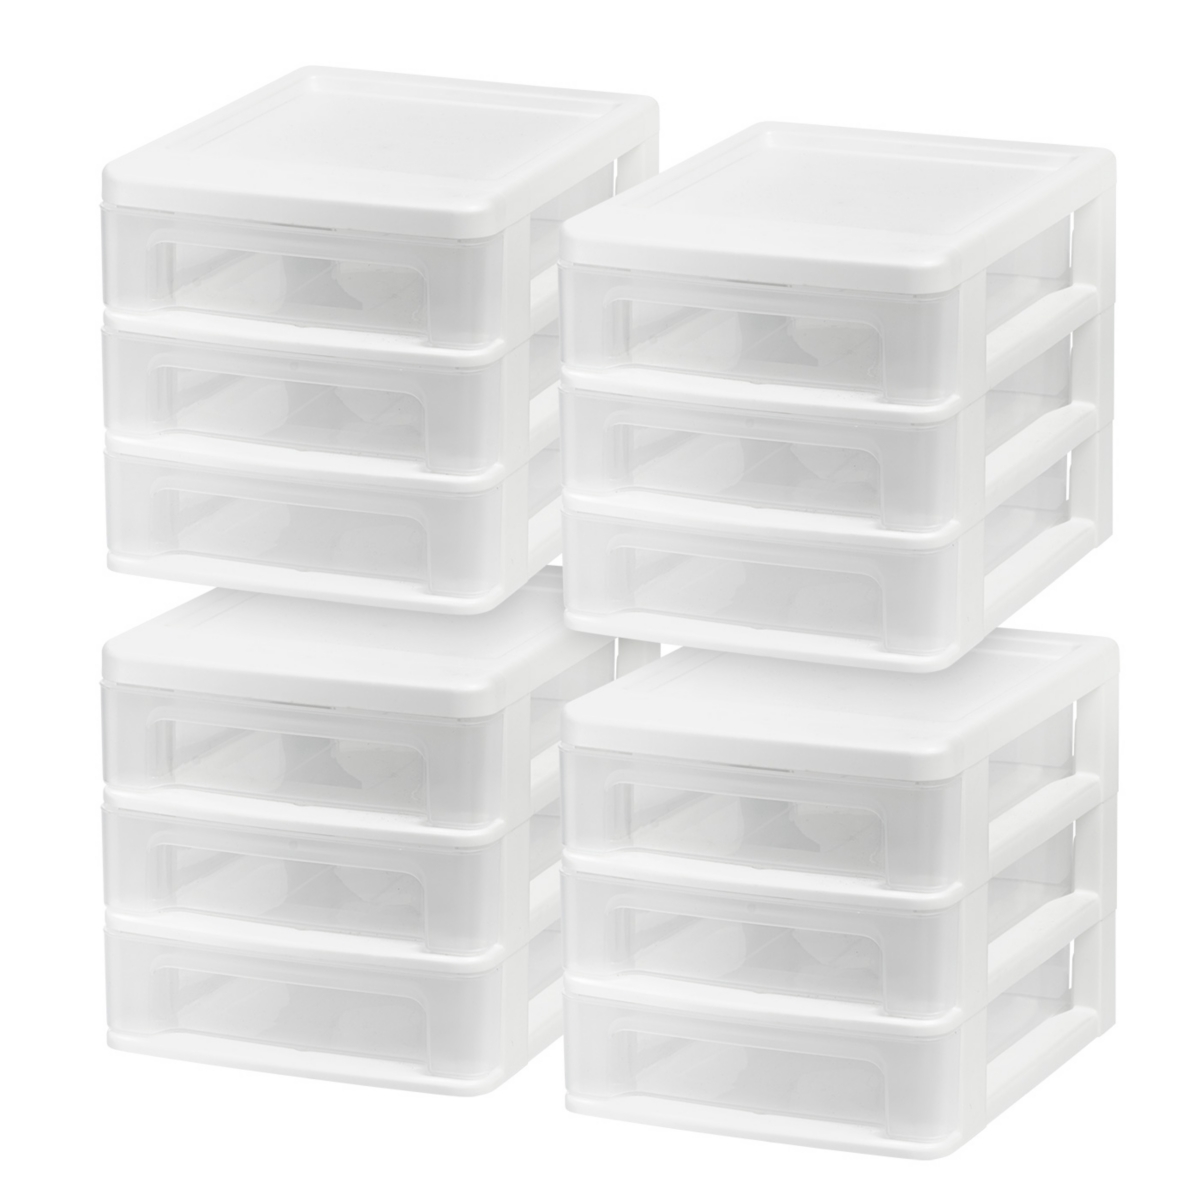 4 Pack Small 3-Drawer Desktop Organizer for Office, Files & Supplies, White - White